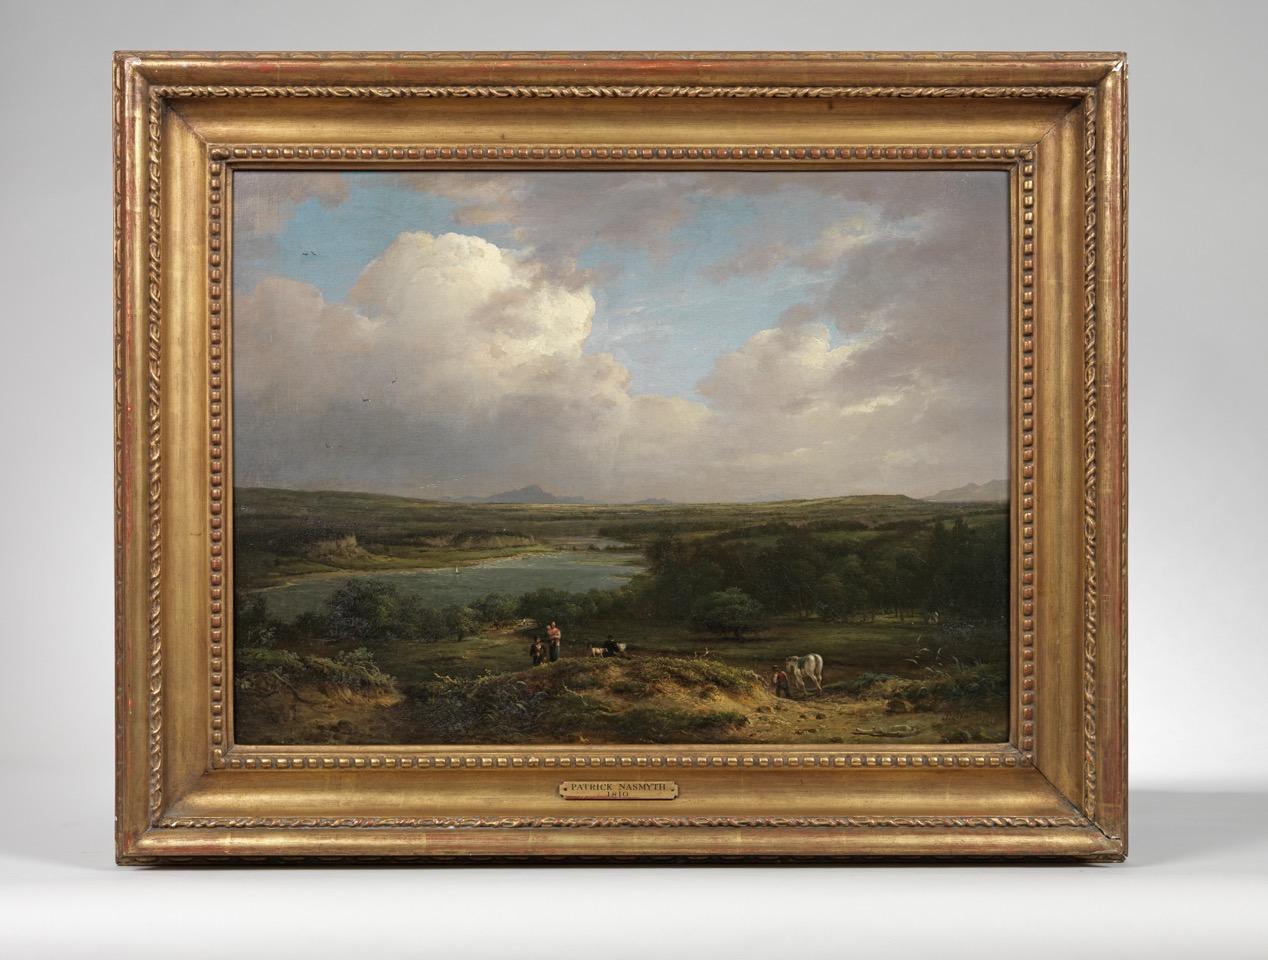 19th Century Scottish Oil Painting of Figures in a Landscape by Patrick Nasmyth For Sale 2